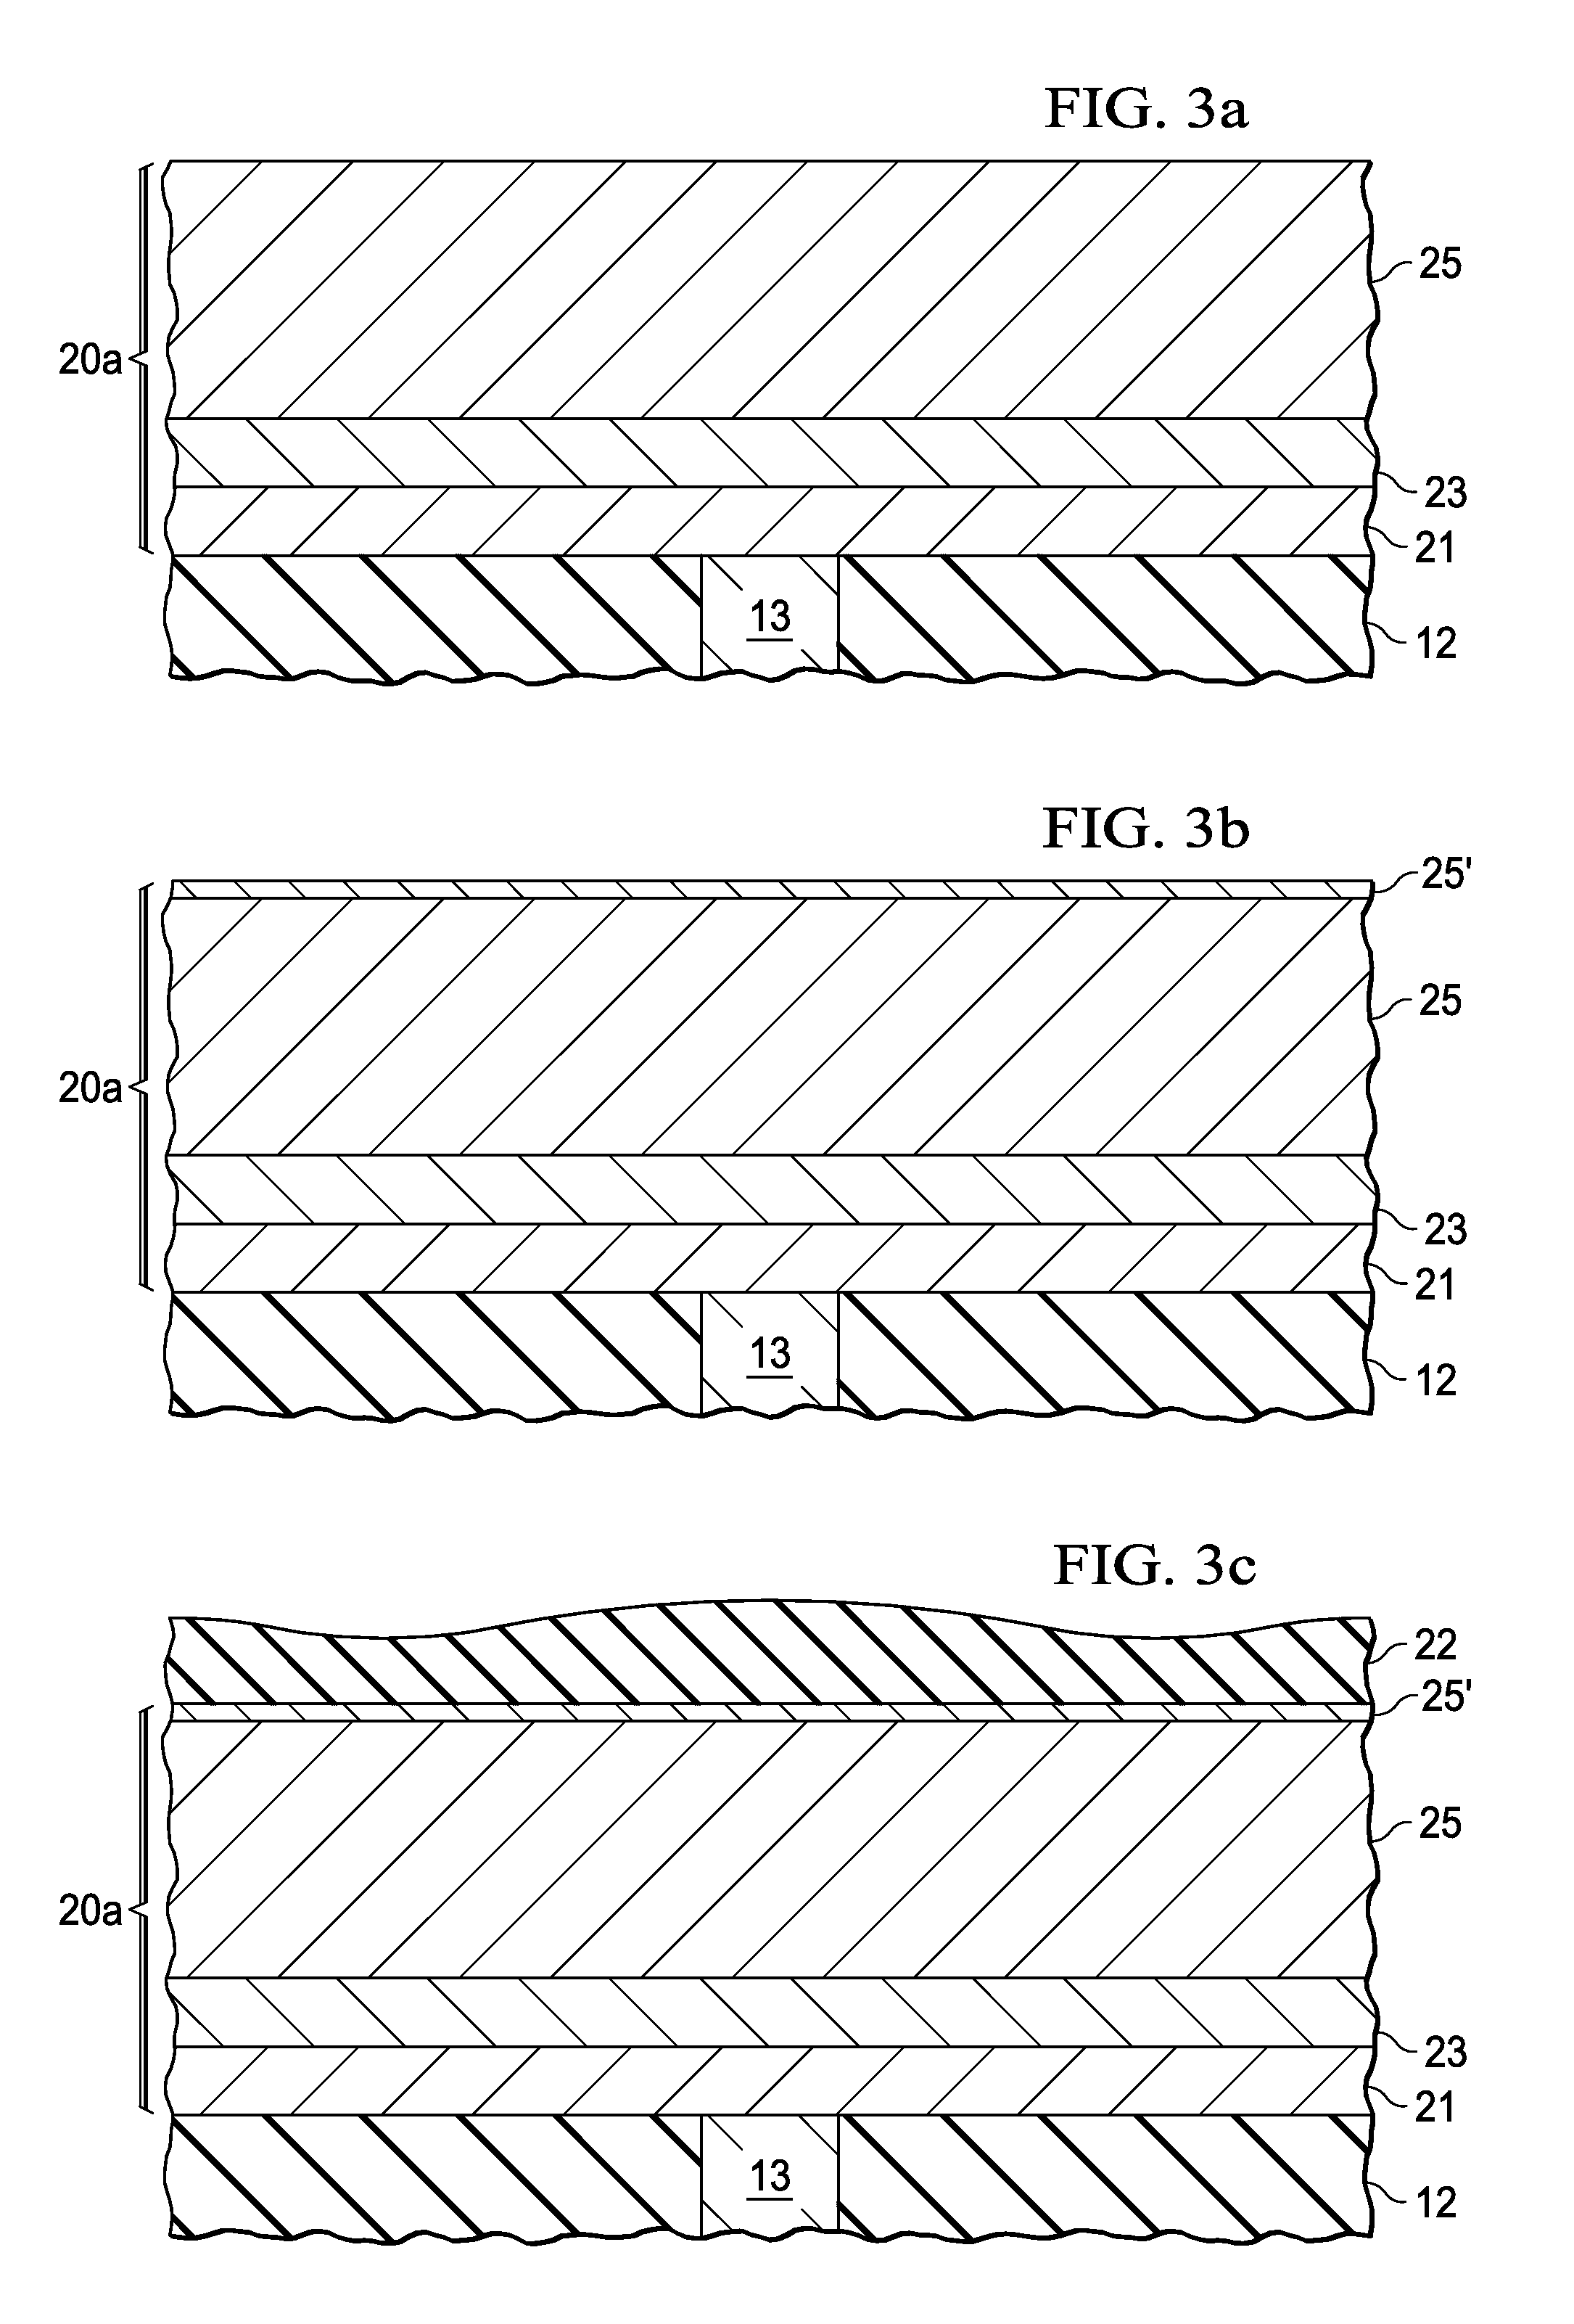 Adhesion of Ferroelectric Material to Underlying Conductive Capacitor Plate